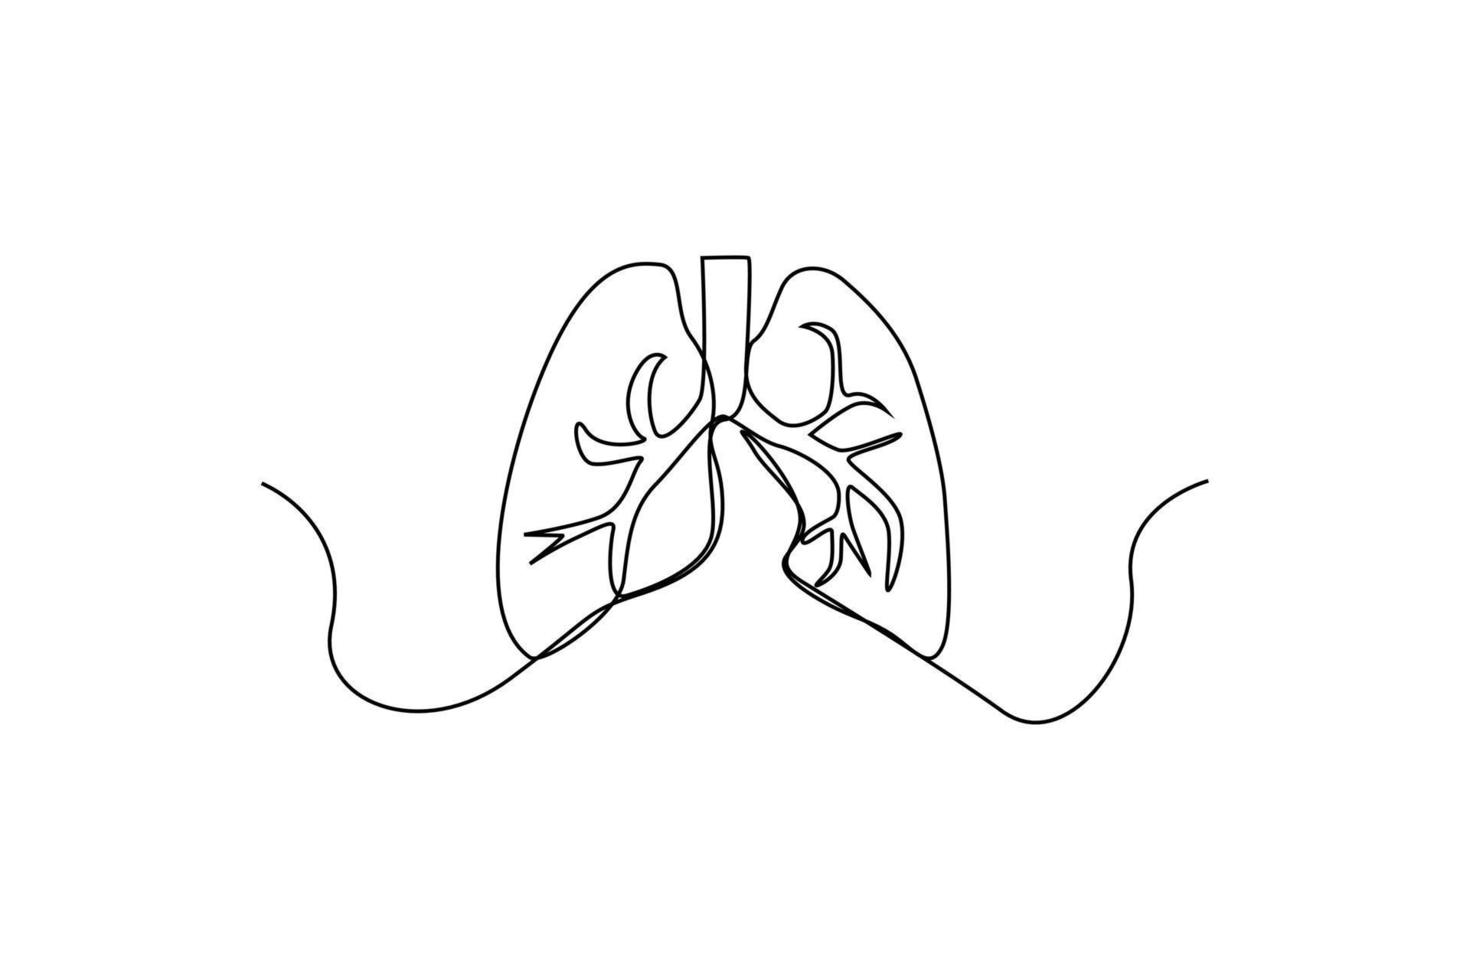 Single one-line drawing healthy lungs without cigarette smoke. World health day concept. Continuous line drawing design graphic vector illustration.